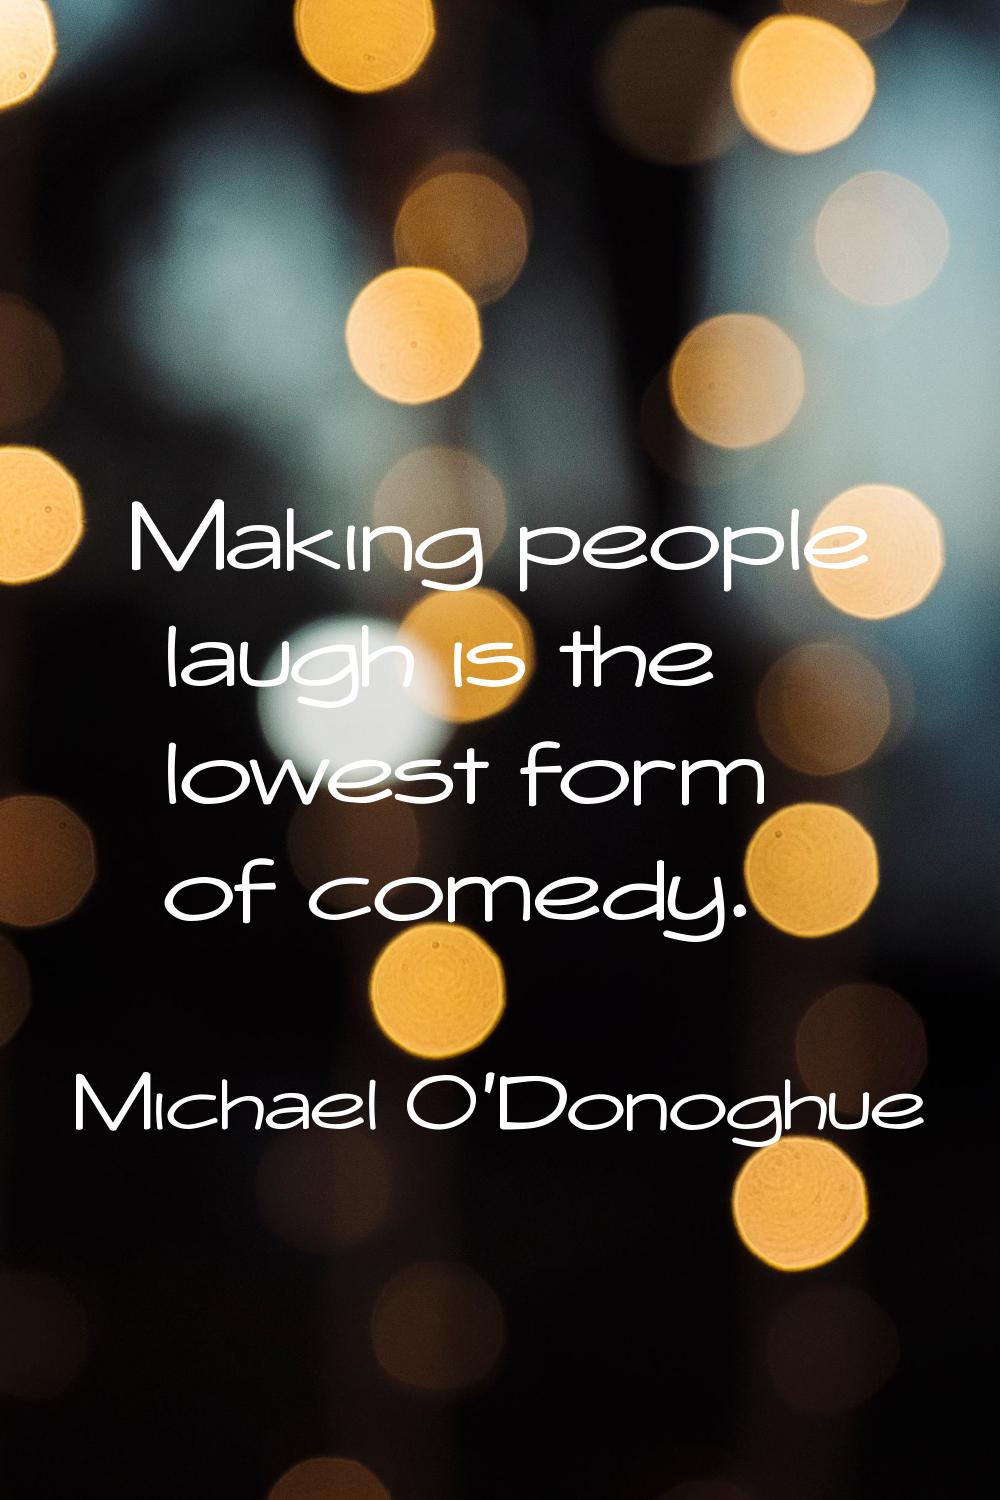 Making people laugh is the lowest form of comedy.